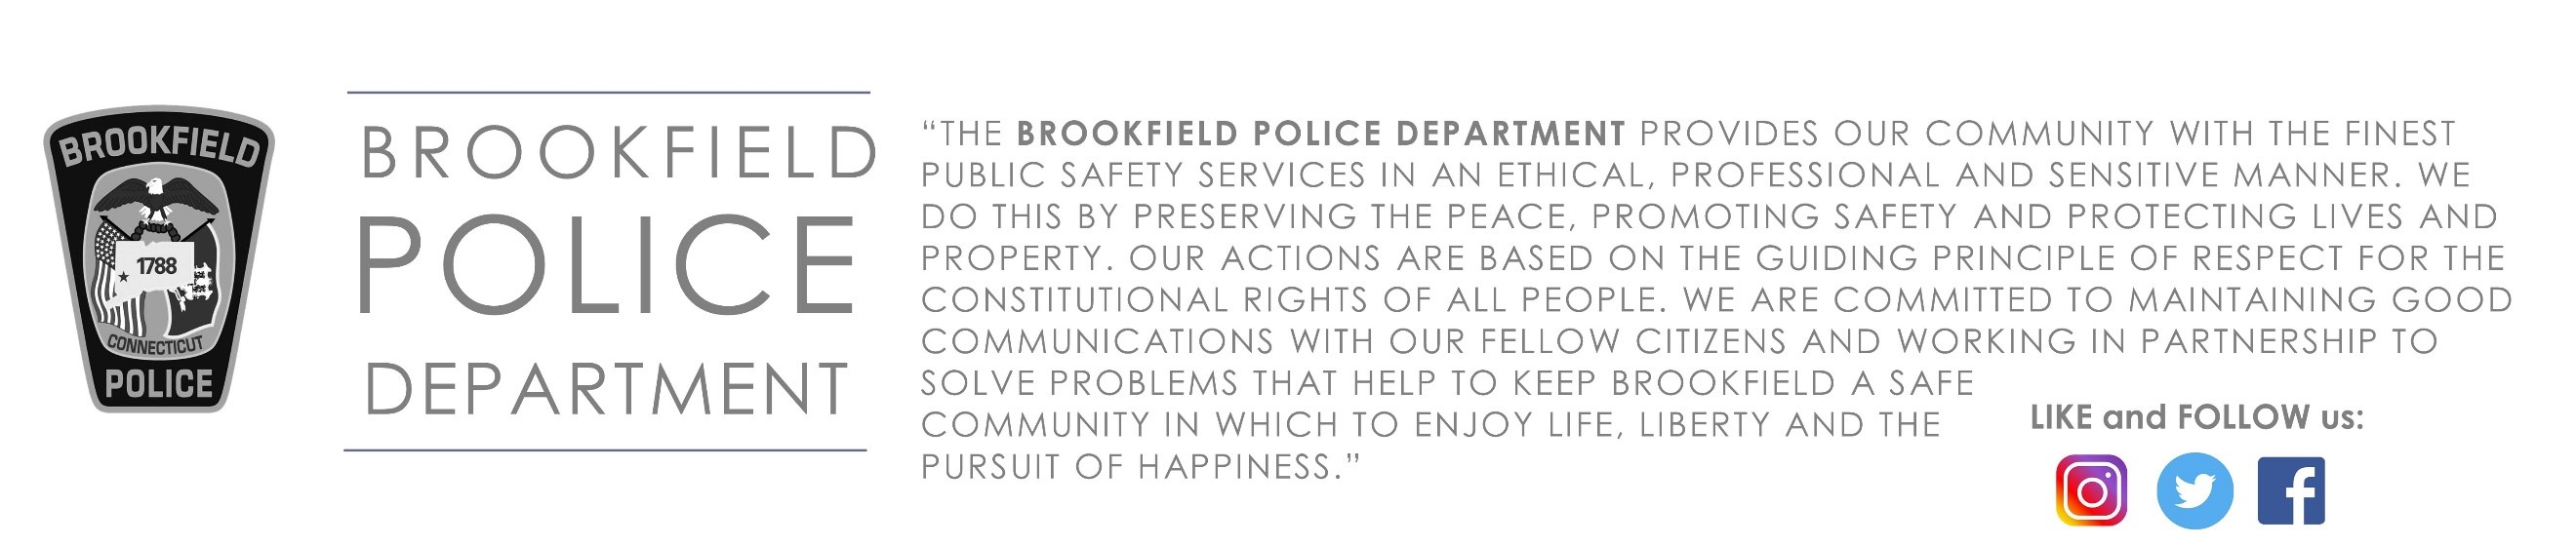 Brookfield Police Department, CT Public Safety Jobs